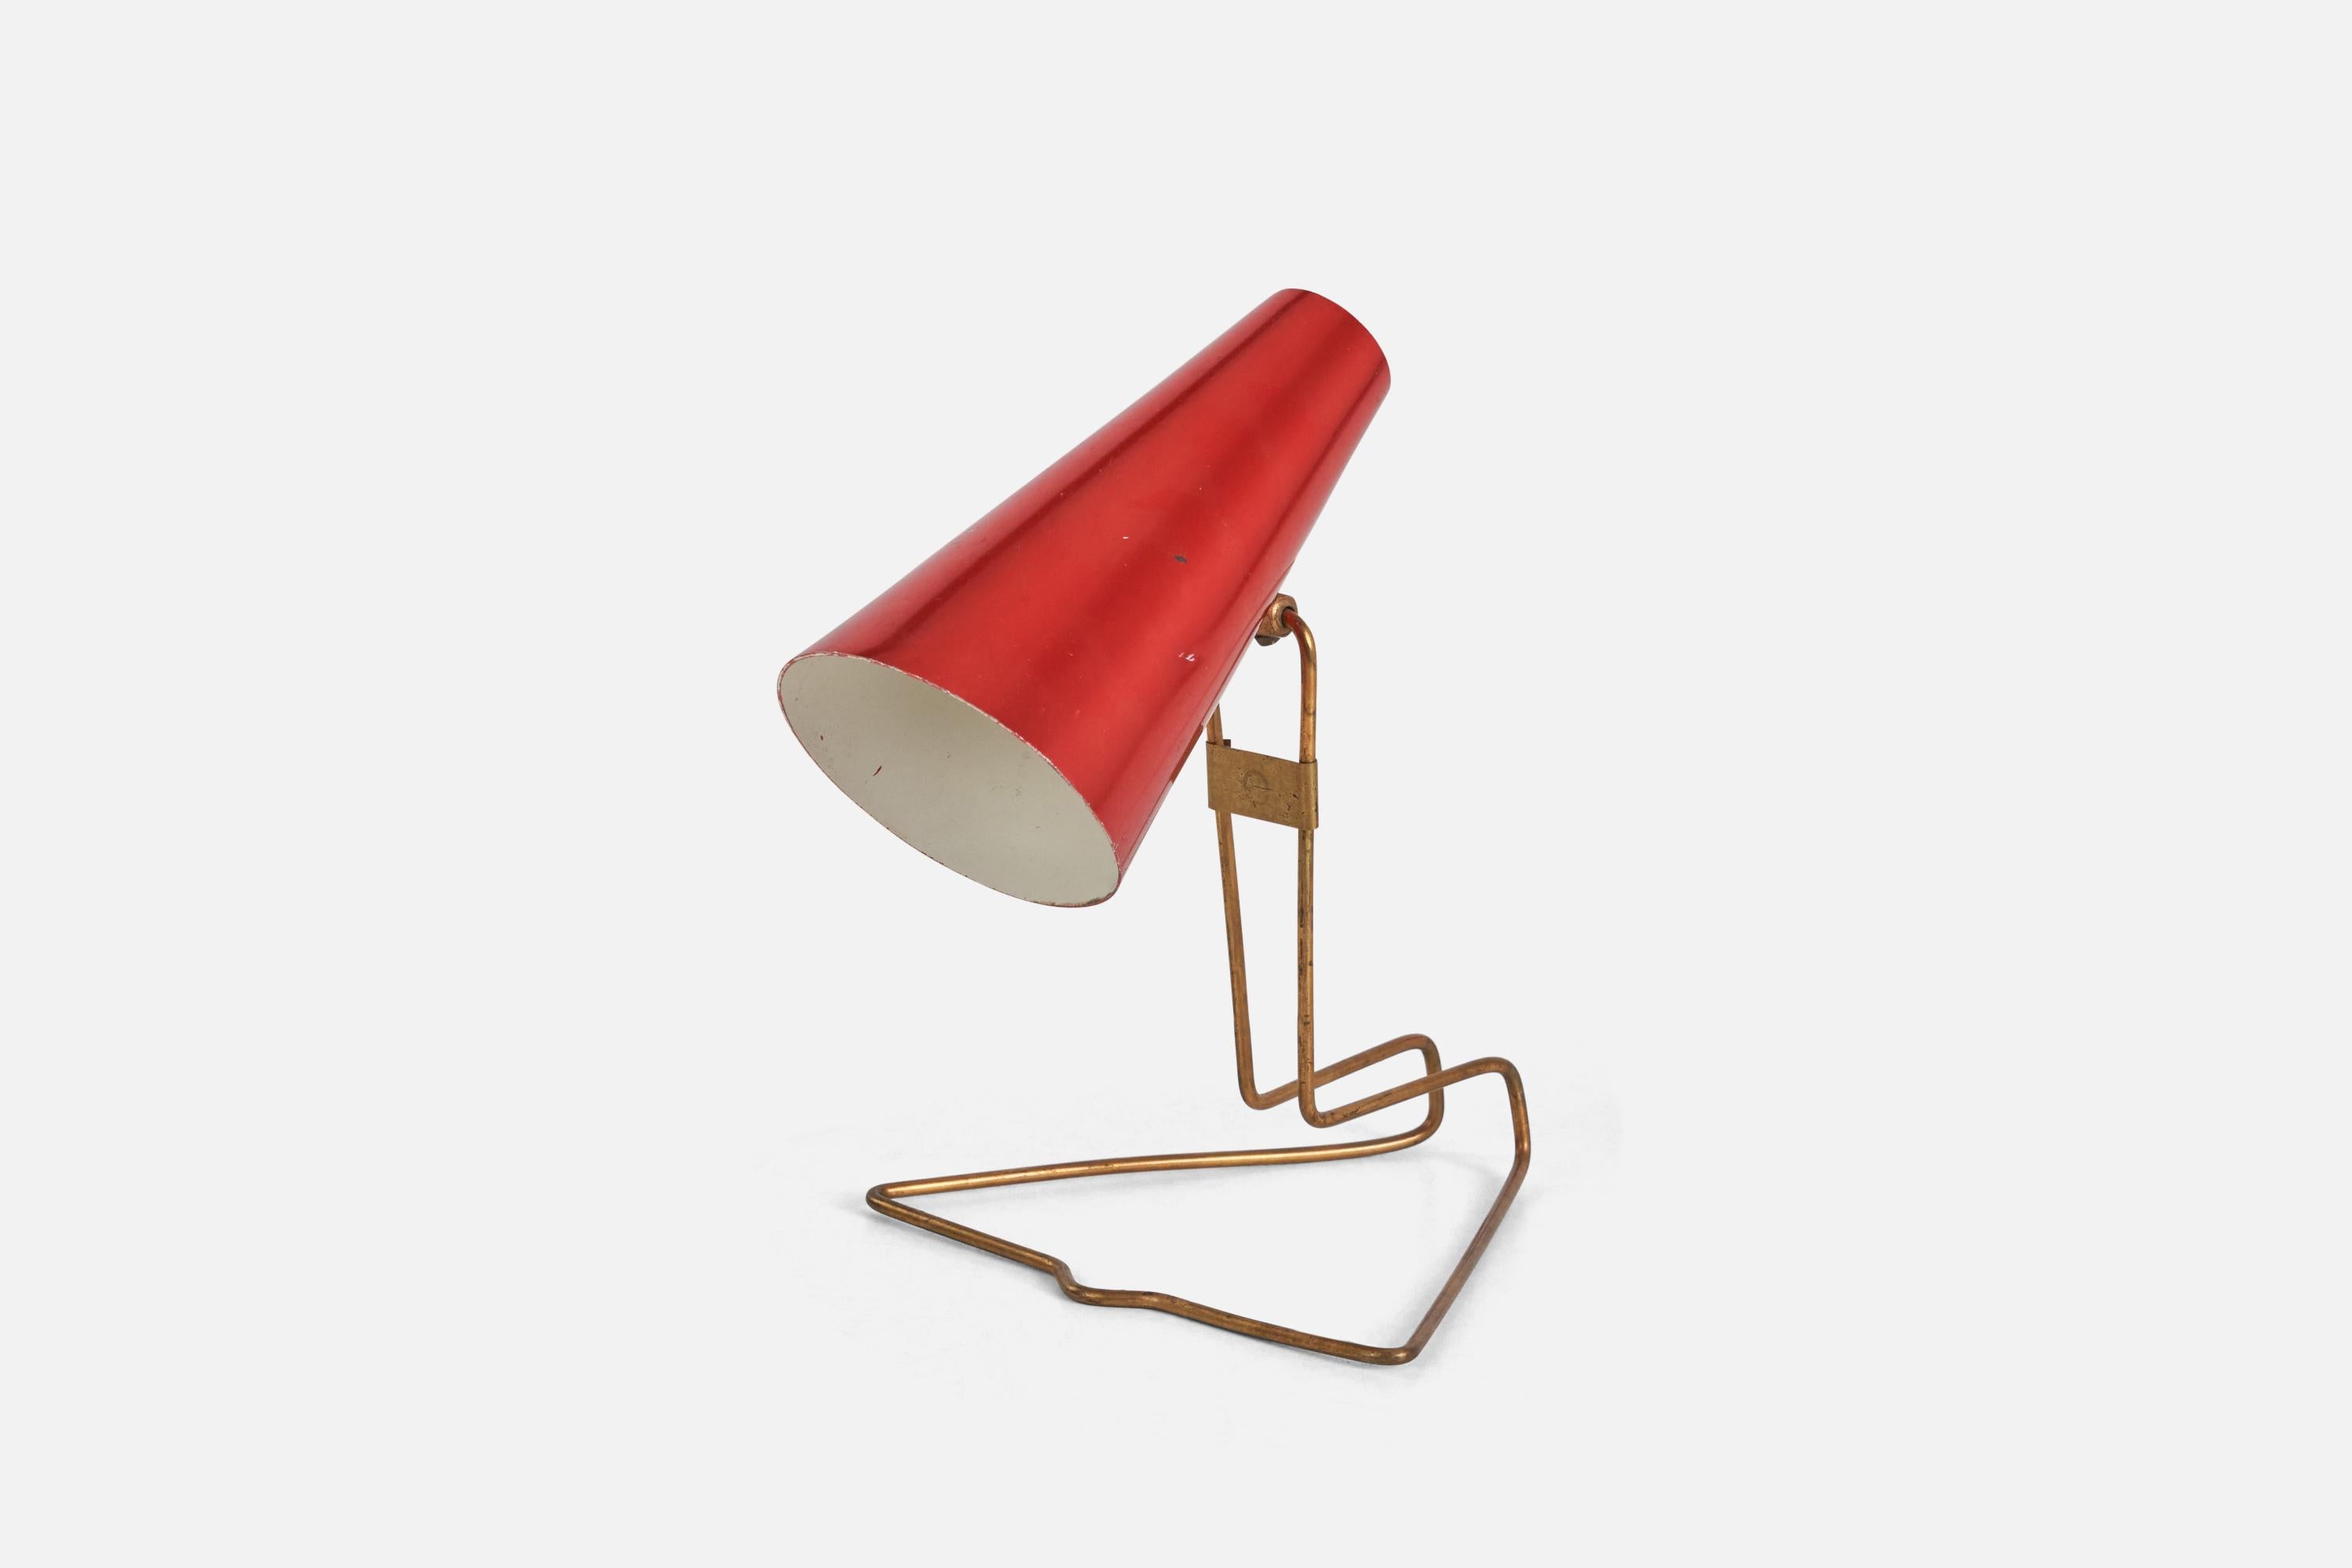 A brass and red-lacquered metal, adjustable table lamp designed and produced by Idman Oy, Finland, 1950s.

Dimensions variable, measured as illustrated in first image.

Socket takes E-14 bulb.

There is no maximum wattage stated on the